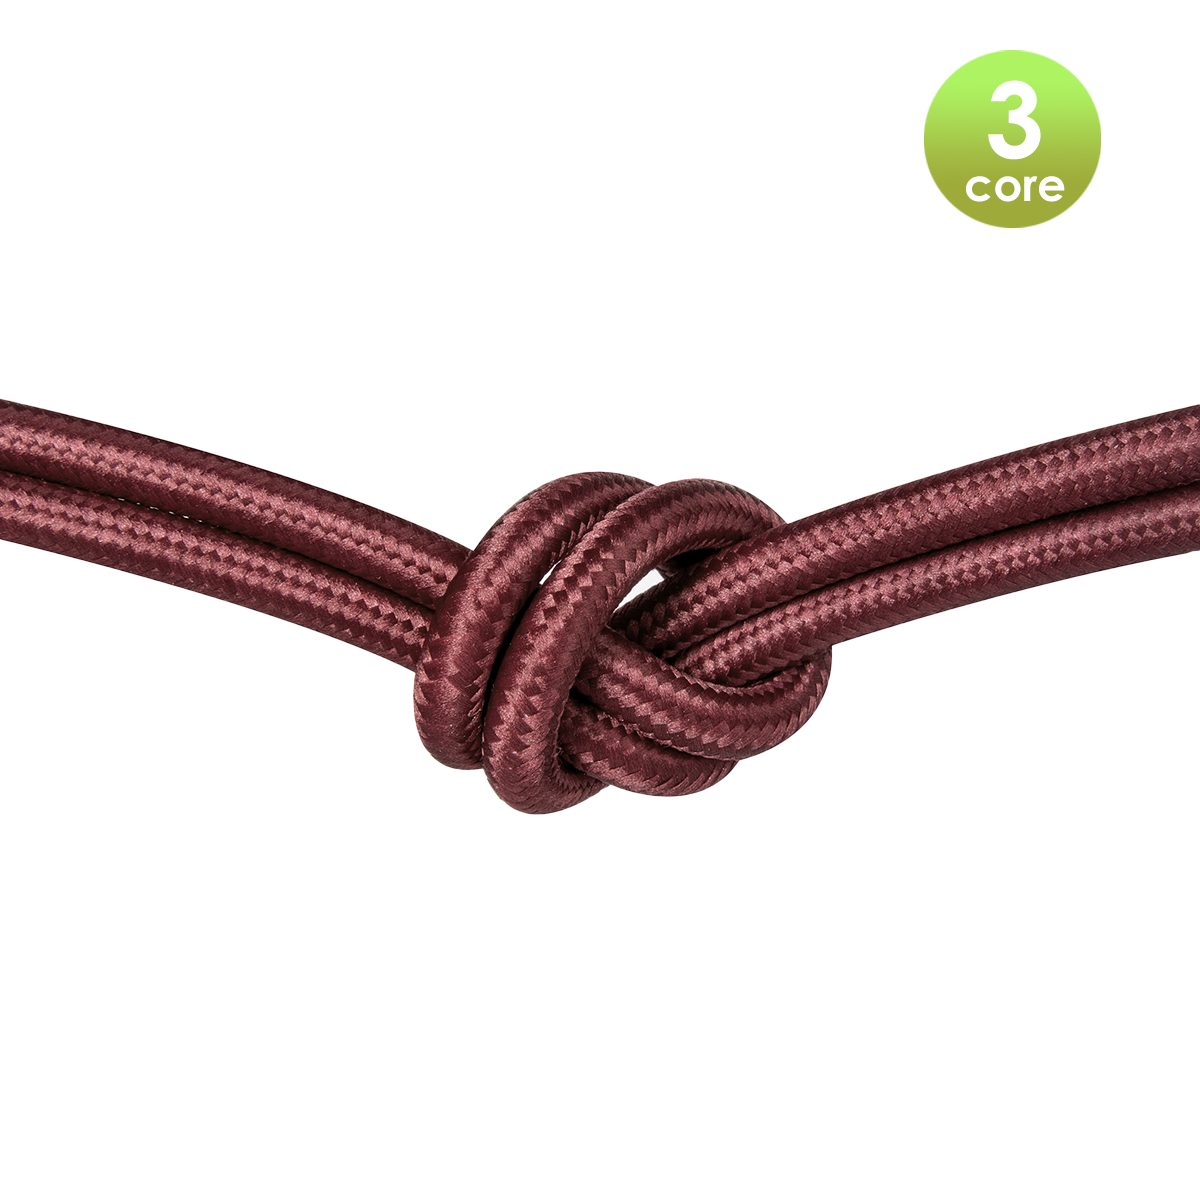 Tangla lighting - TLCB01010RD - 3c - Fabric cable 3 core - in barn red